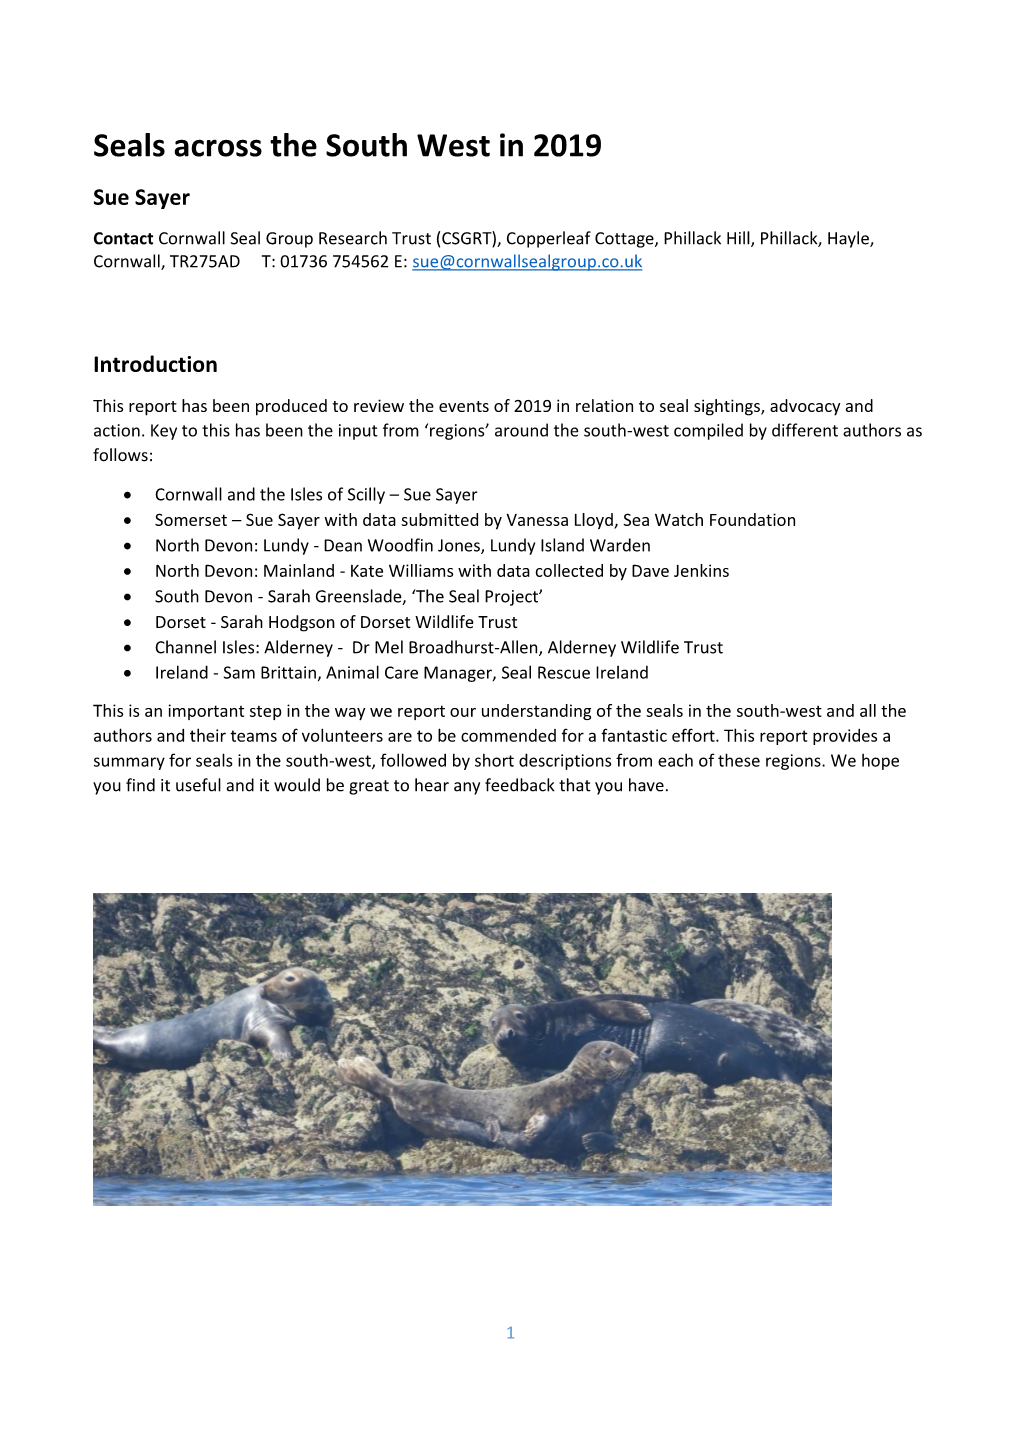 Seals Across the South West in 2019 Sue Sayer